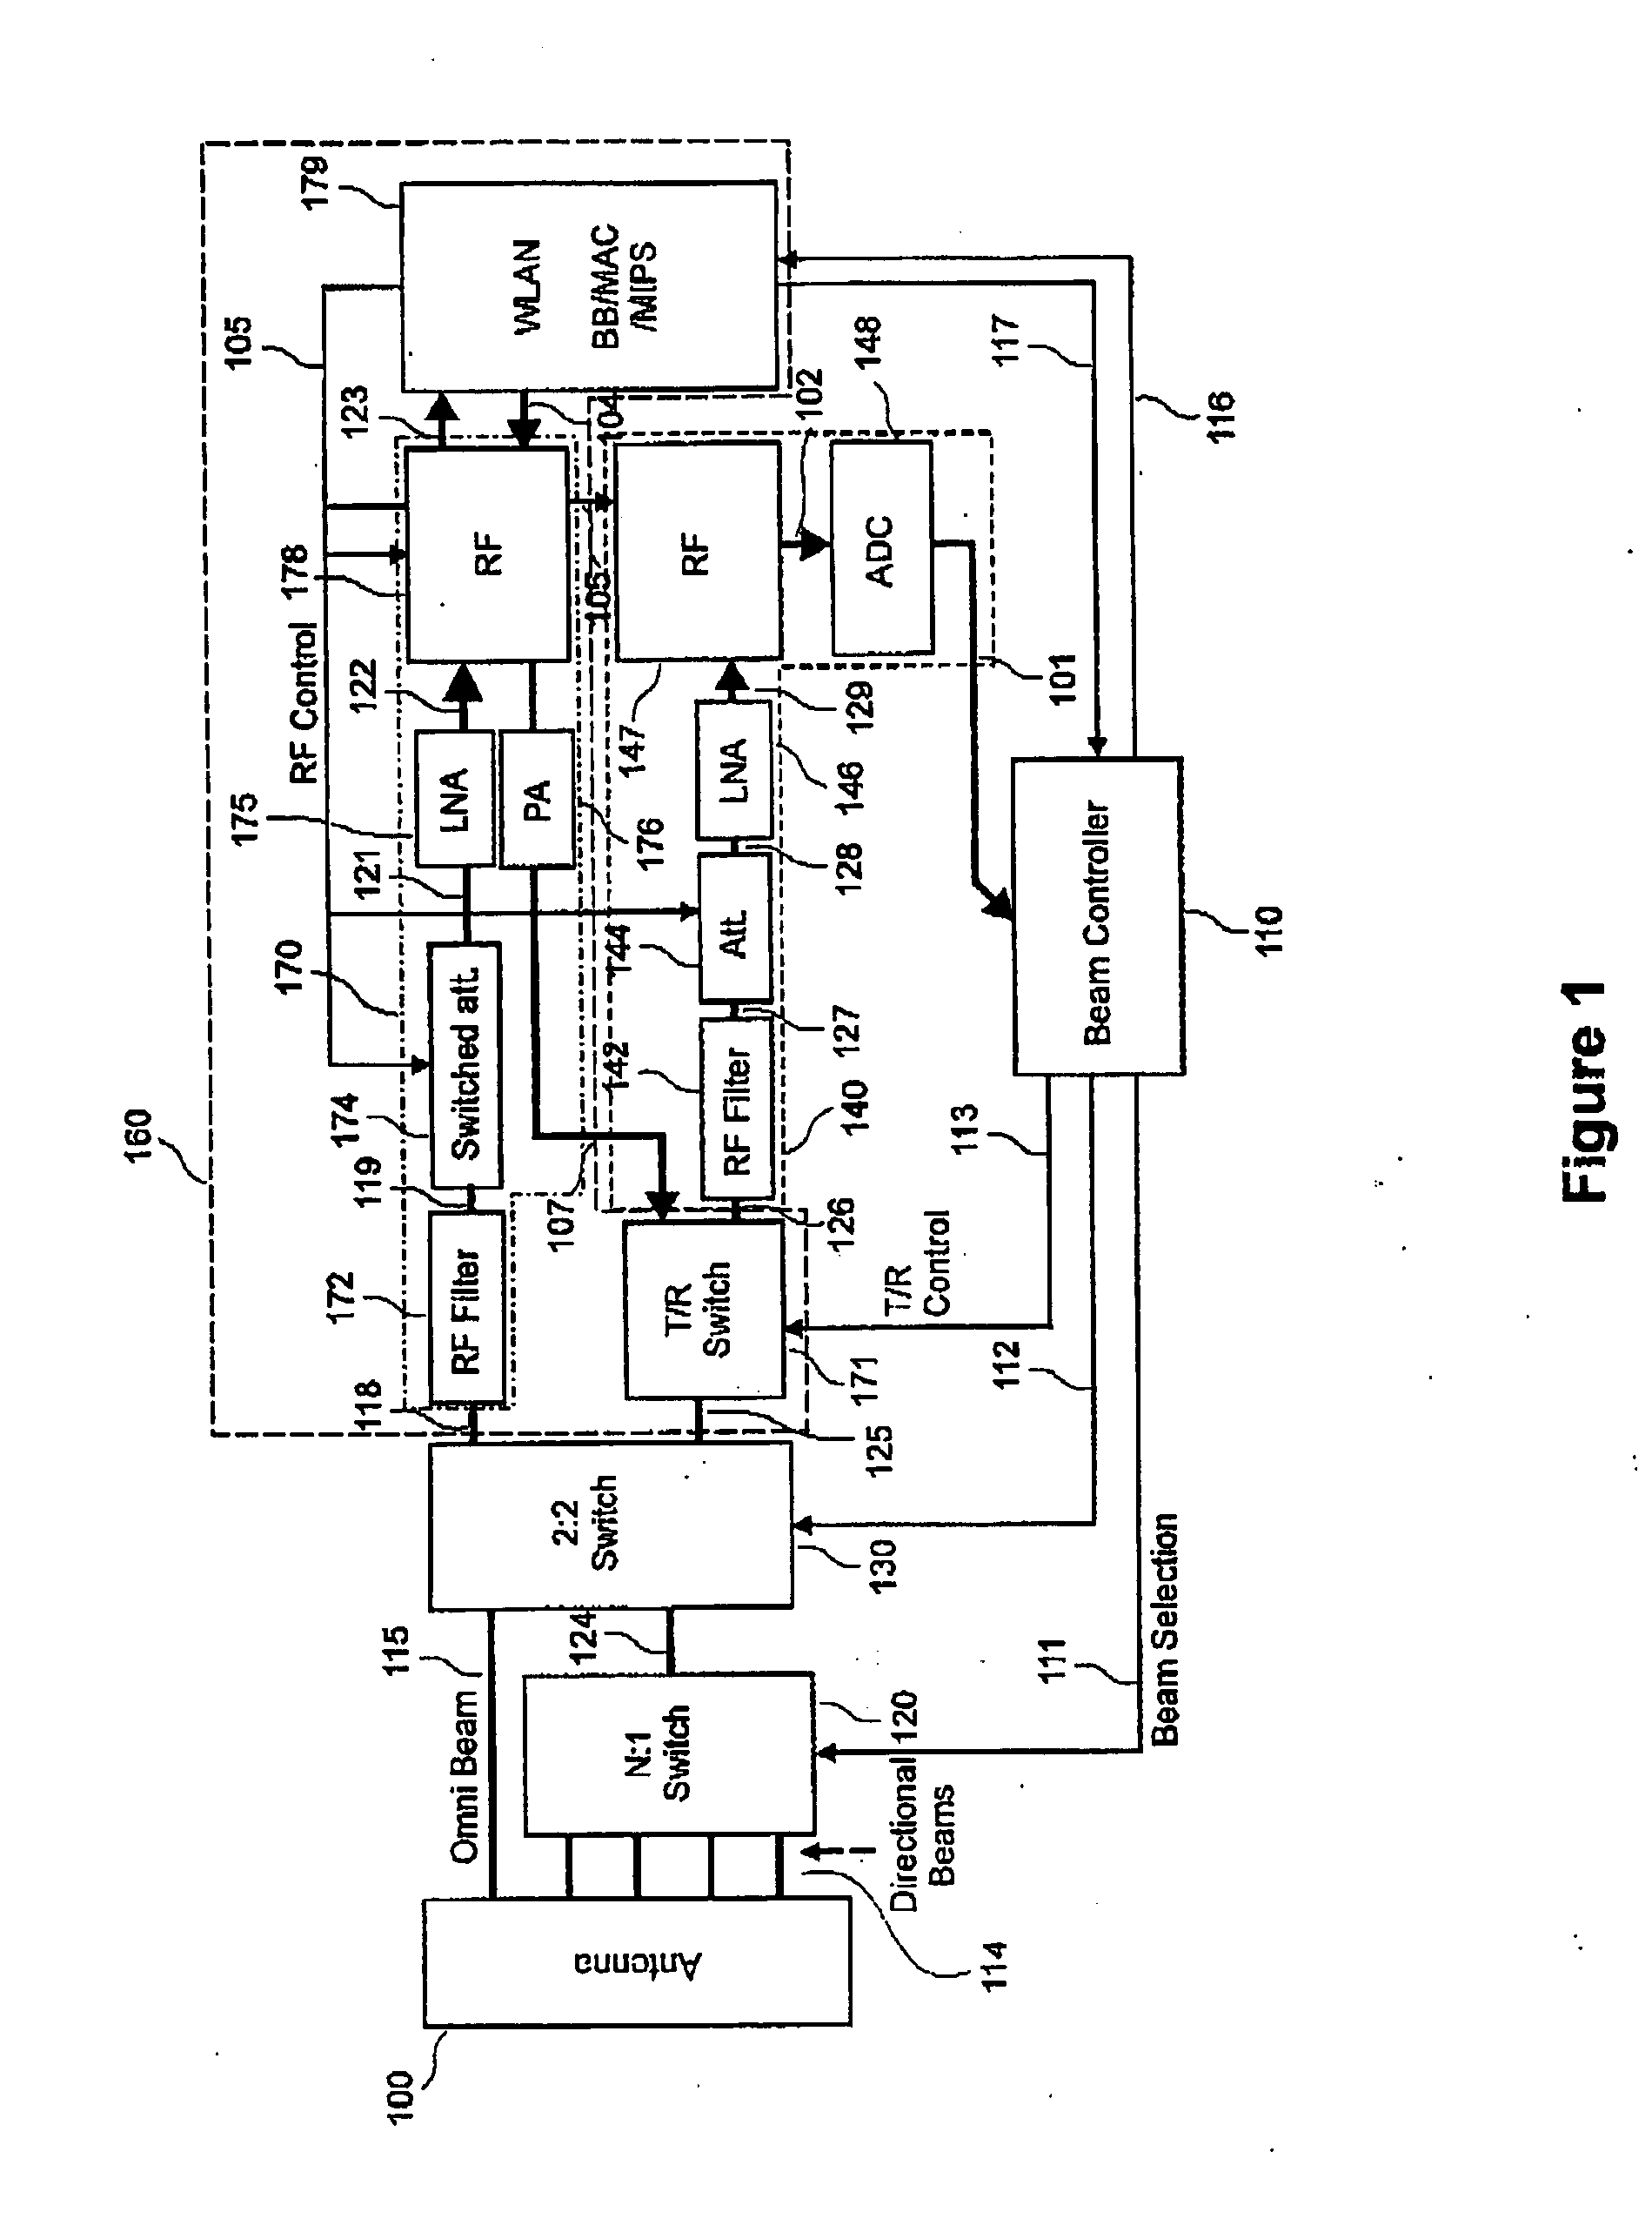 Method and apparatus for Wi-Fi capacity enhancement